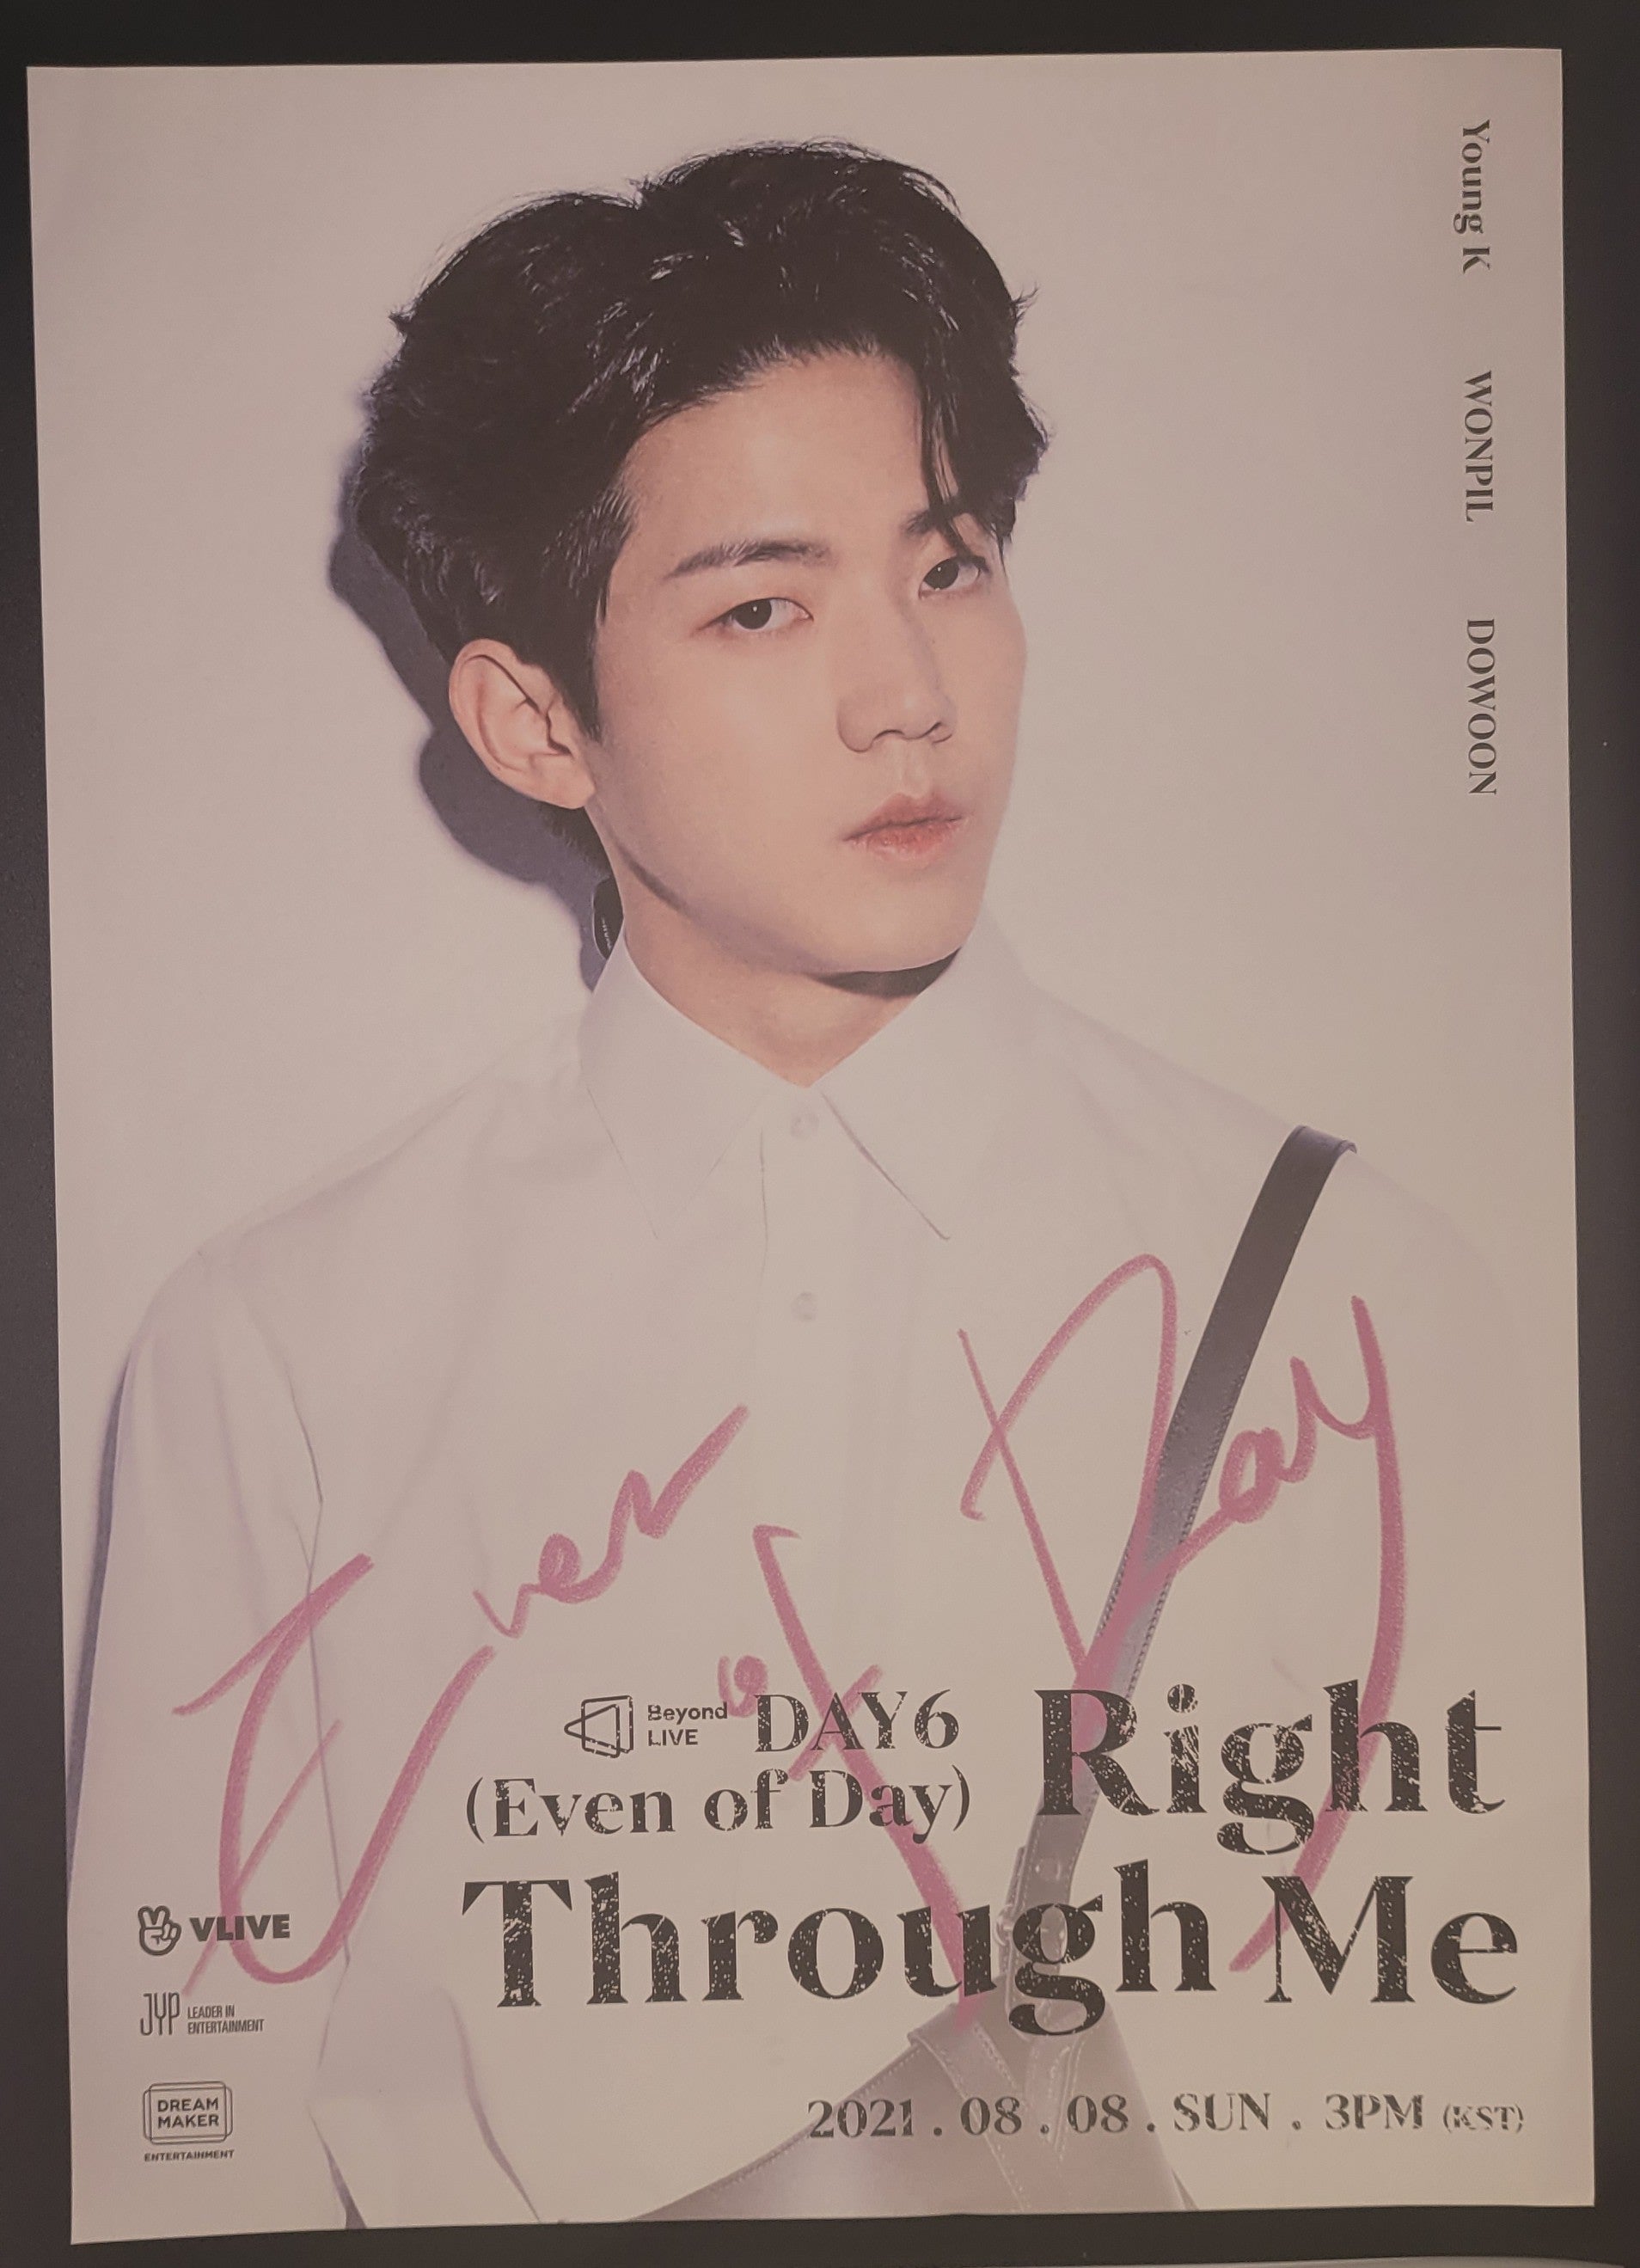 DAY6 (EVEN OF DAY) ONLINE CONCERT BEYOND LIVE (RIGHT THROUGH ME) POB POSTER